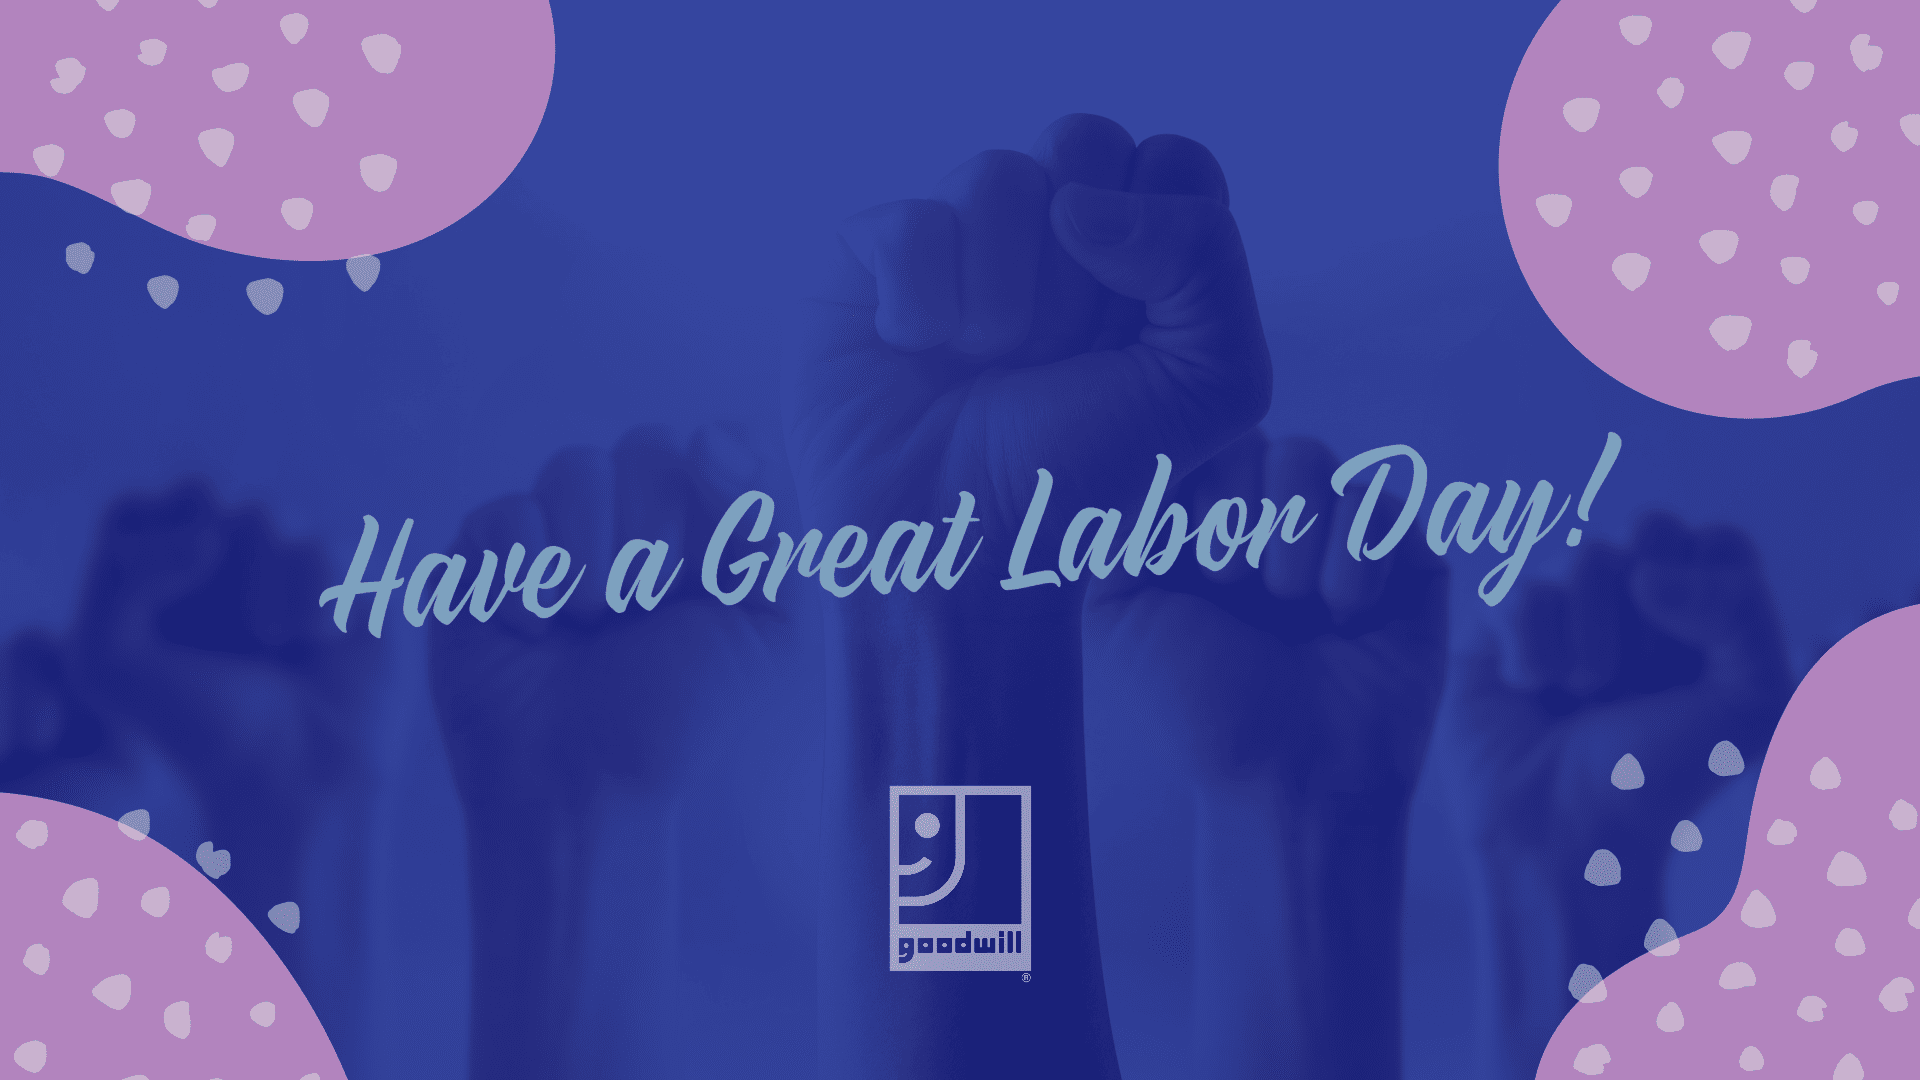 [Have a great Labor Day!]